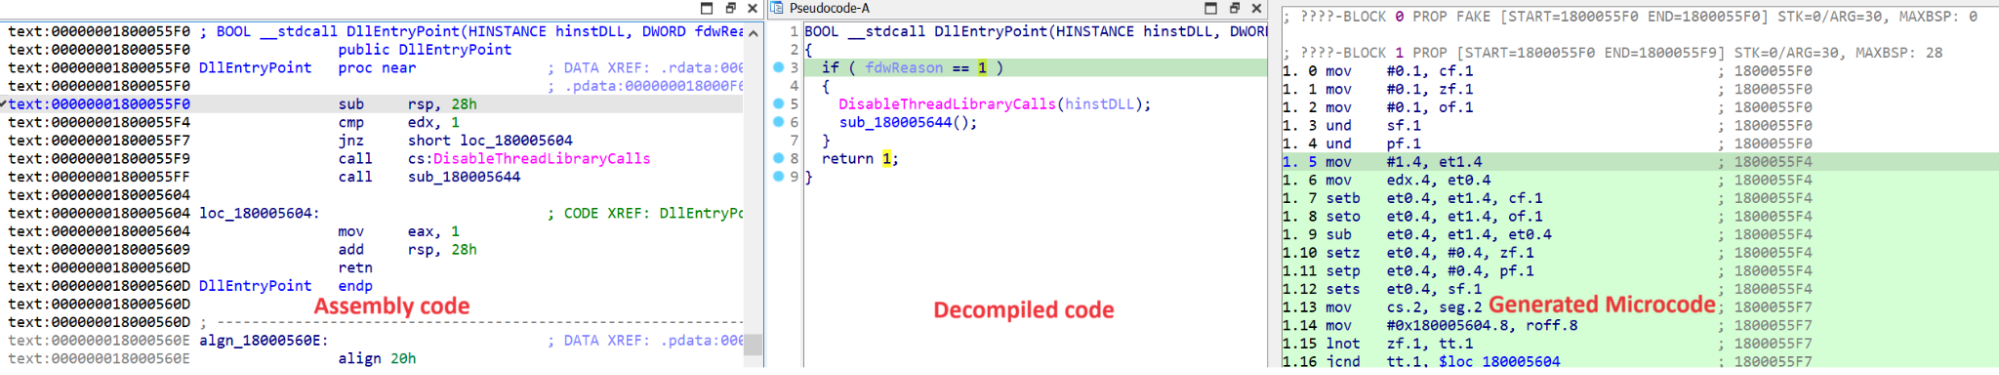 A view of the assembly code, decompiled code, and microcode